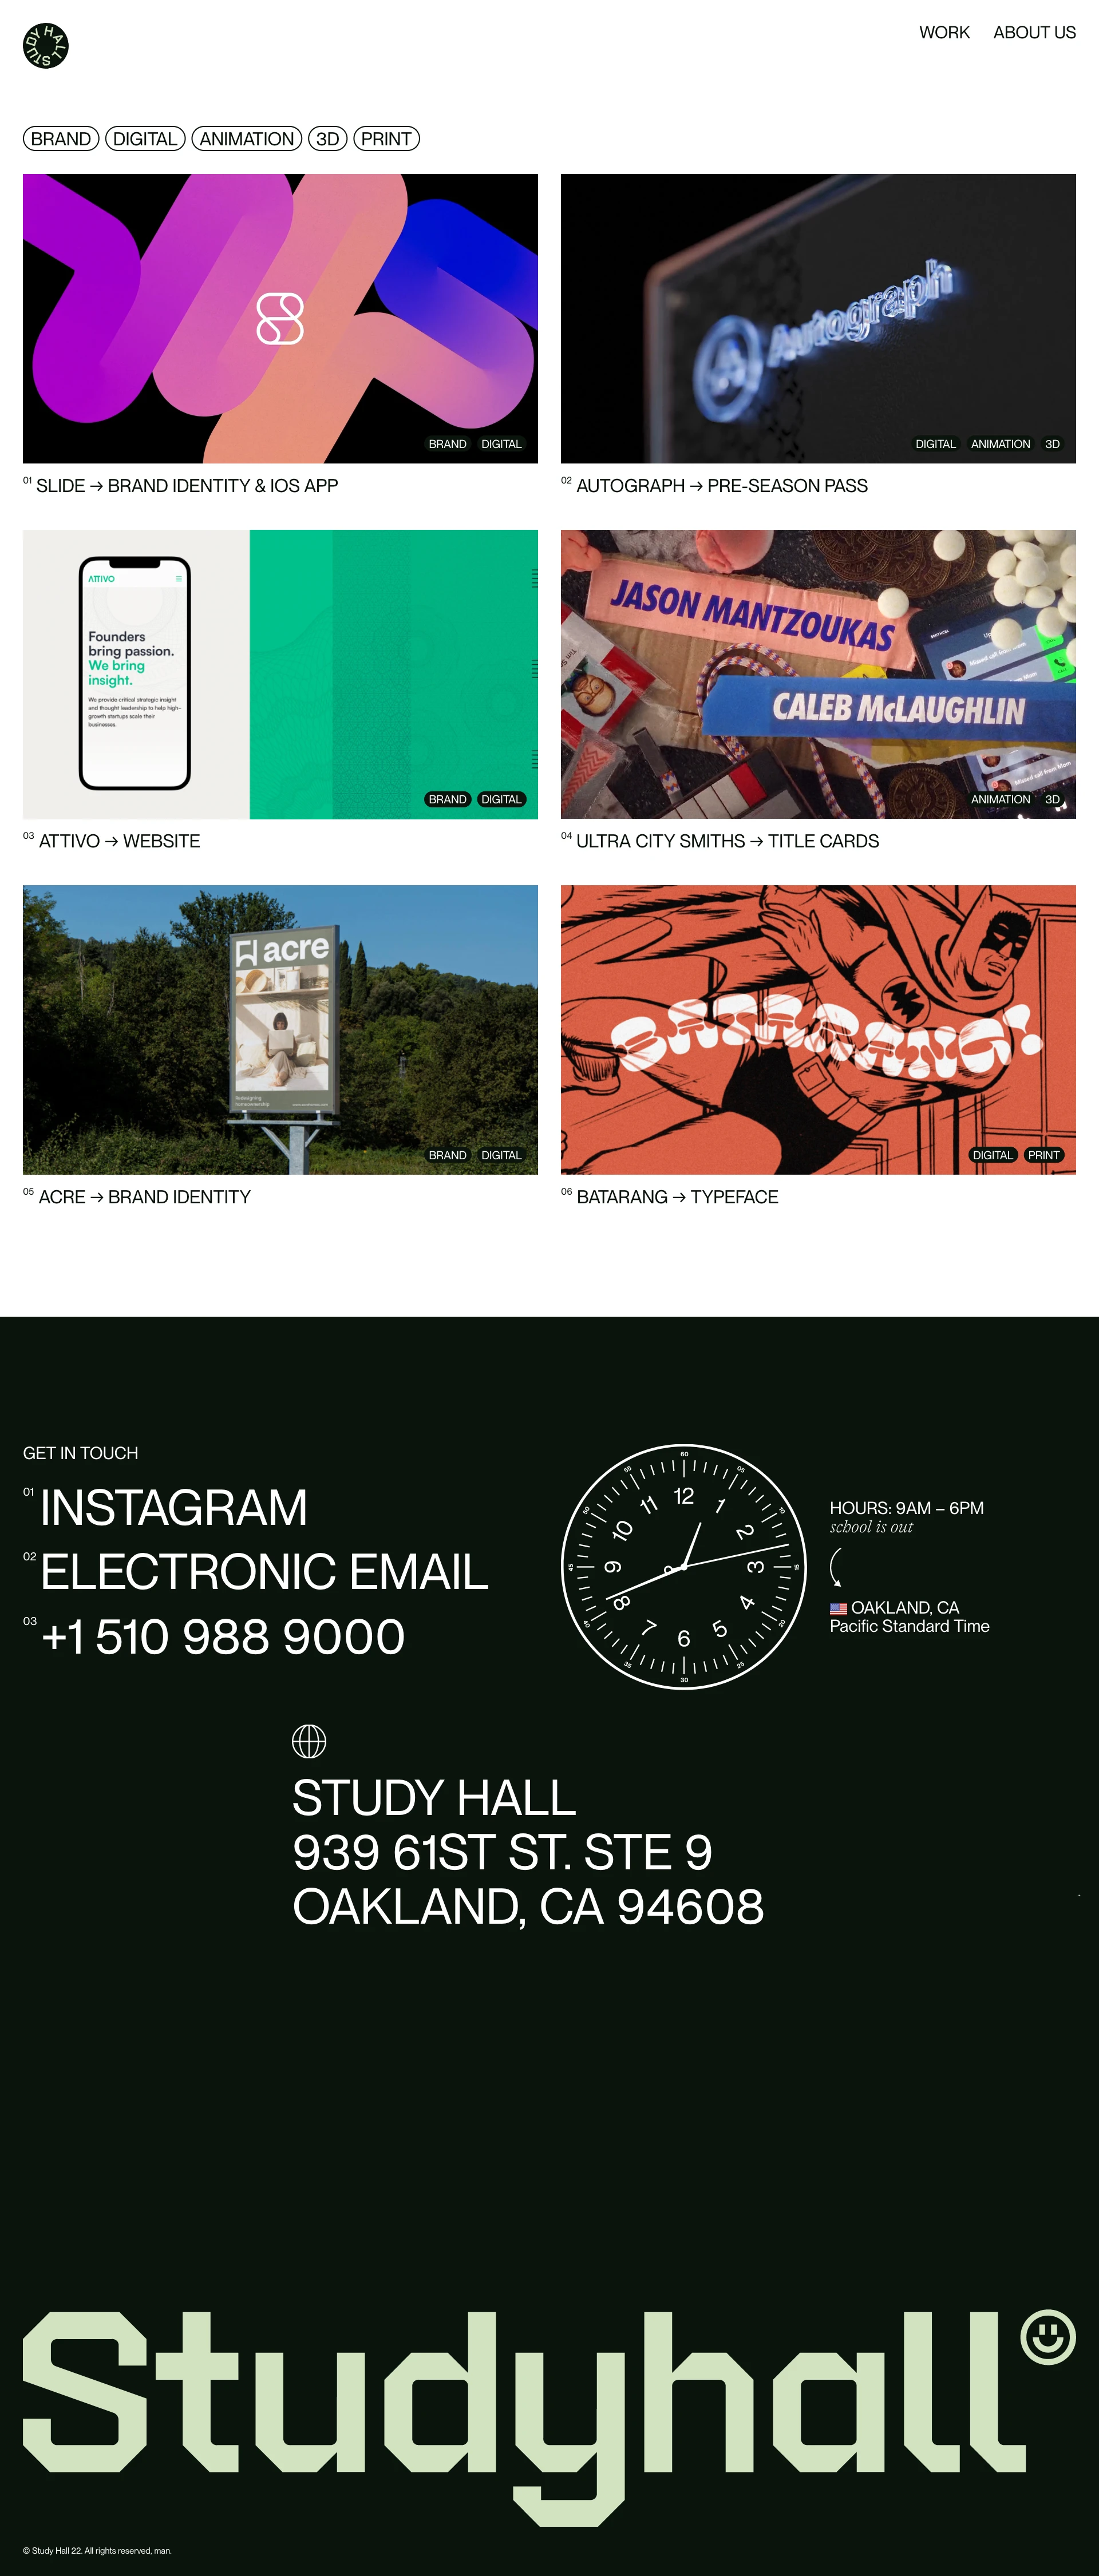 Study Hall Landing Page Example: Study Hall is an Oakland-based creative studio specializing in distinct, compelling, and delightful work for brave clients.